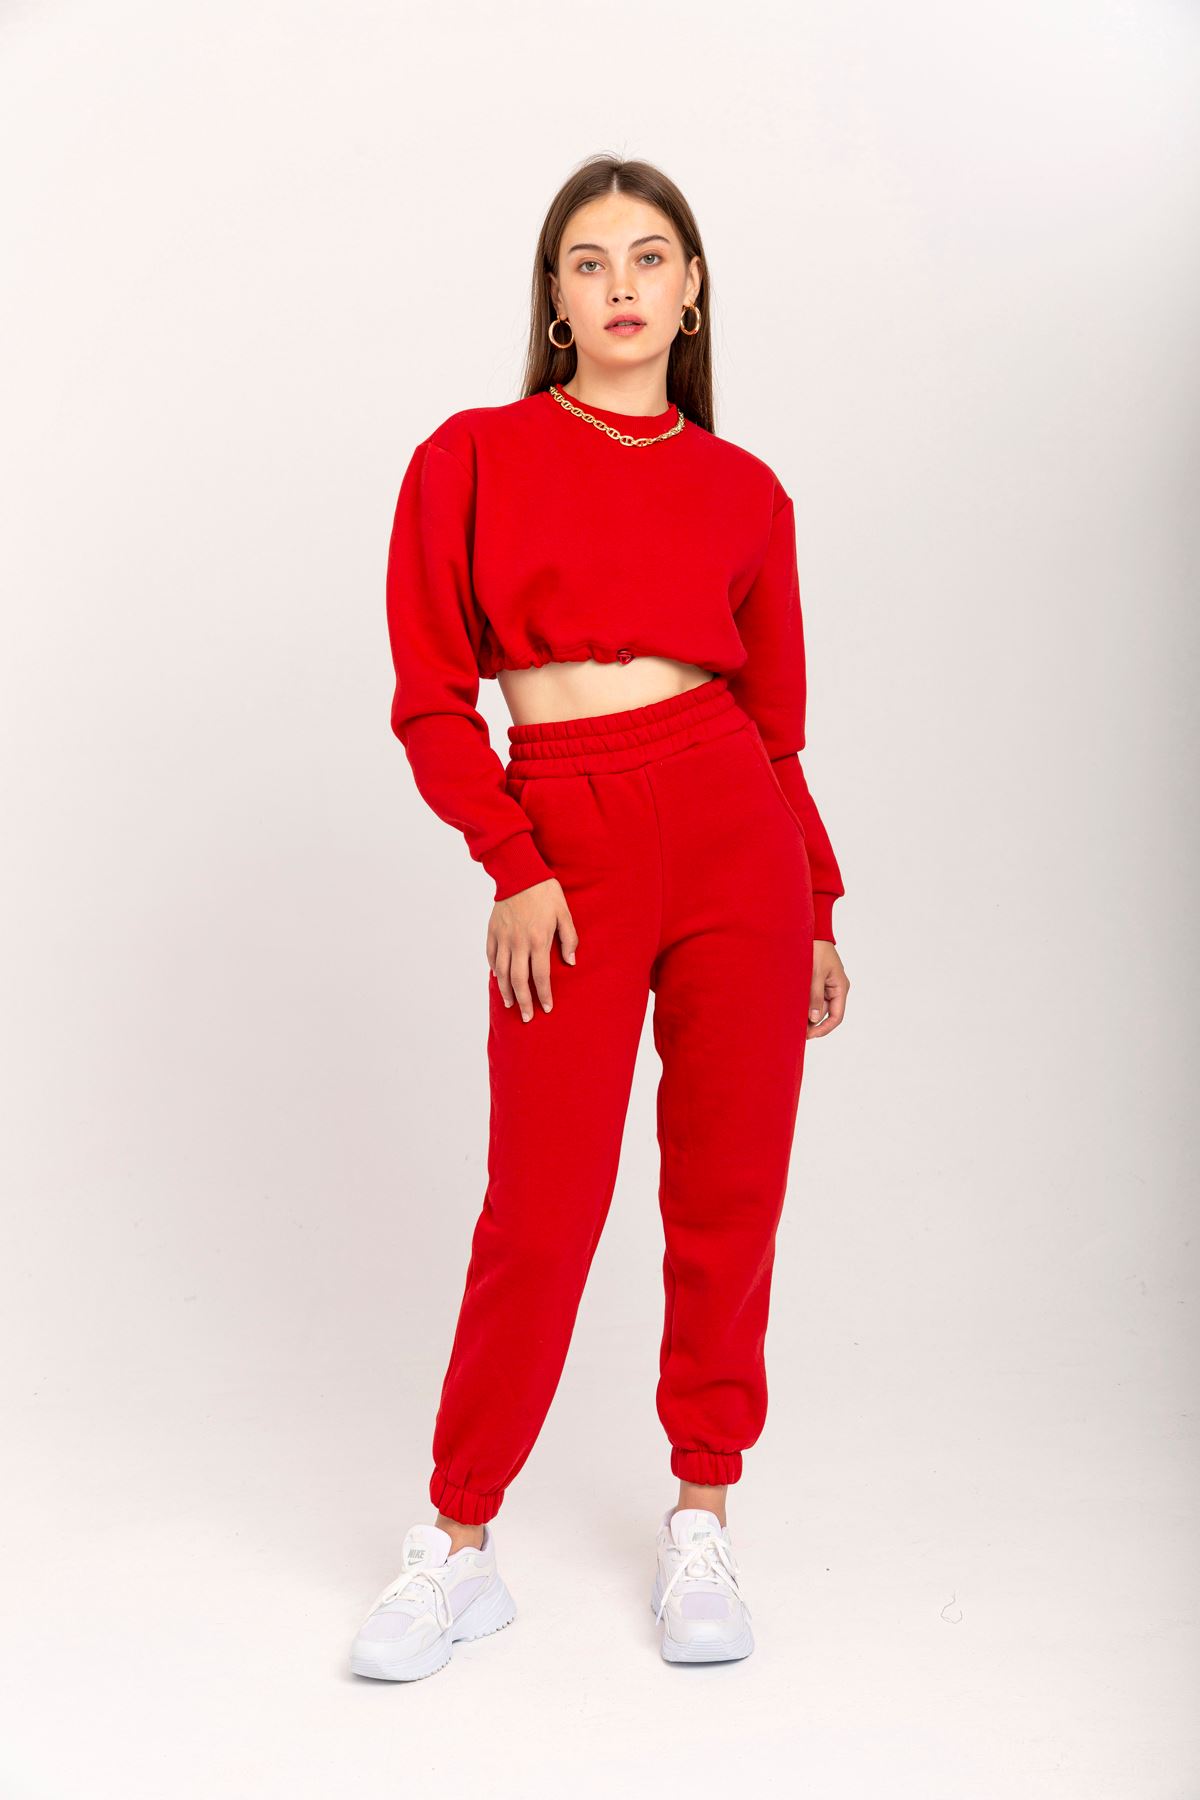 Third Knit Fabric Long Comfy Fit Elastic Hems Women'S Trouser - Red